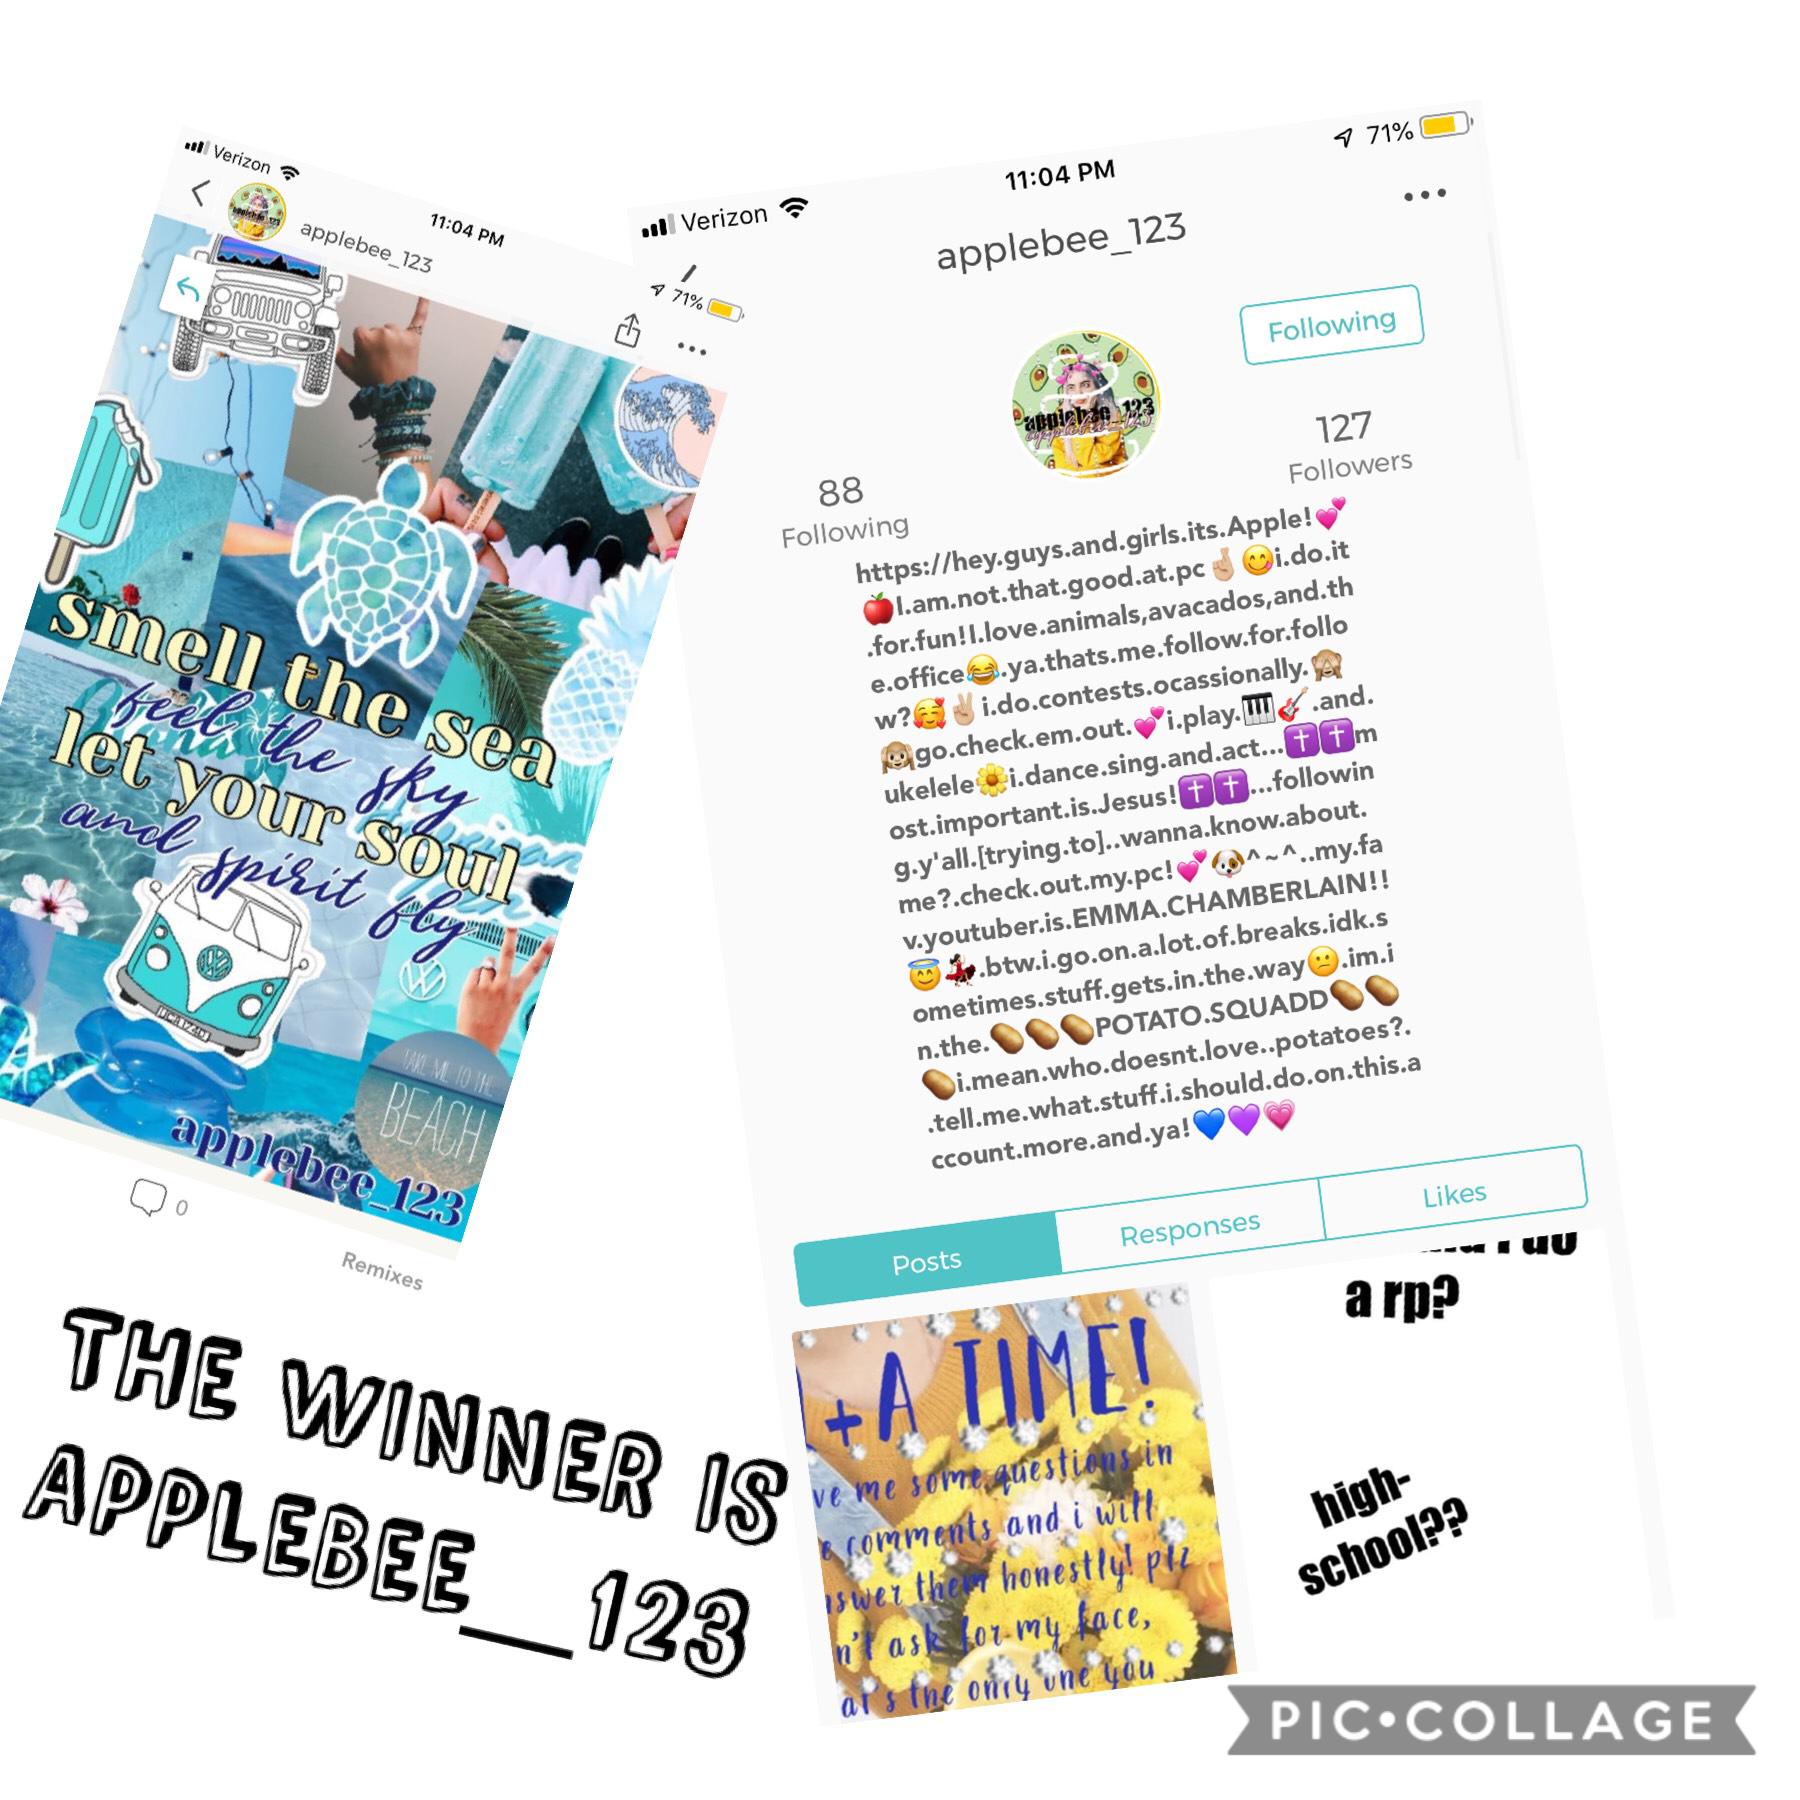 TAP
We decided since like no one was joining we would just pick our favorite and end this. Applebee_123 is the winner!! Congrats!🎉EVERYONE WHO WAS ACTUALLY IN THE CONTEST DID GREAT 💚❤️ SRY IT DIDNT WORK OUT AS PLANNED PEOPLE WHO ACTUALLY JOINED. MAYBE WE 